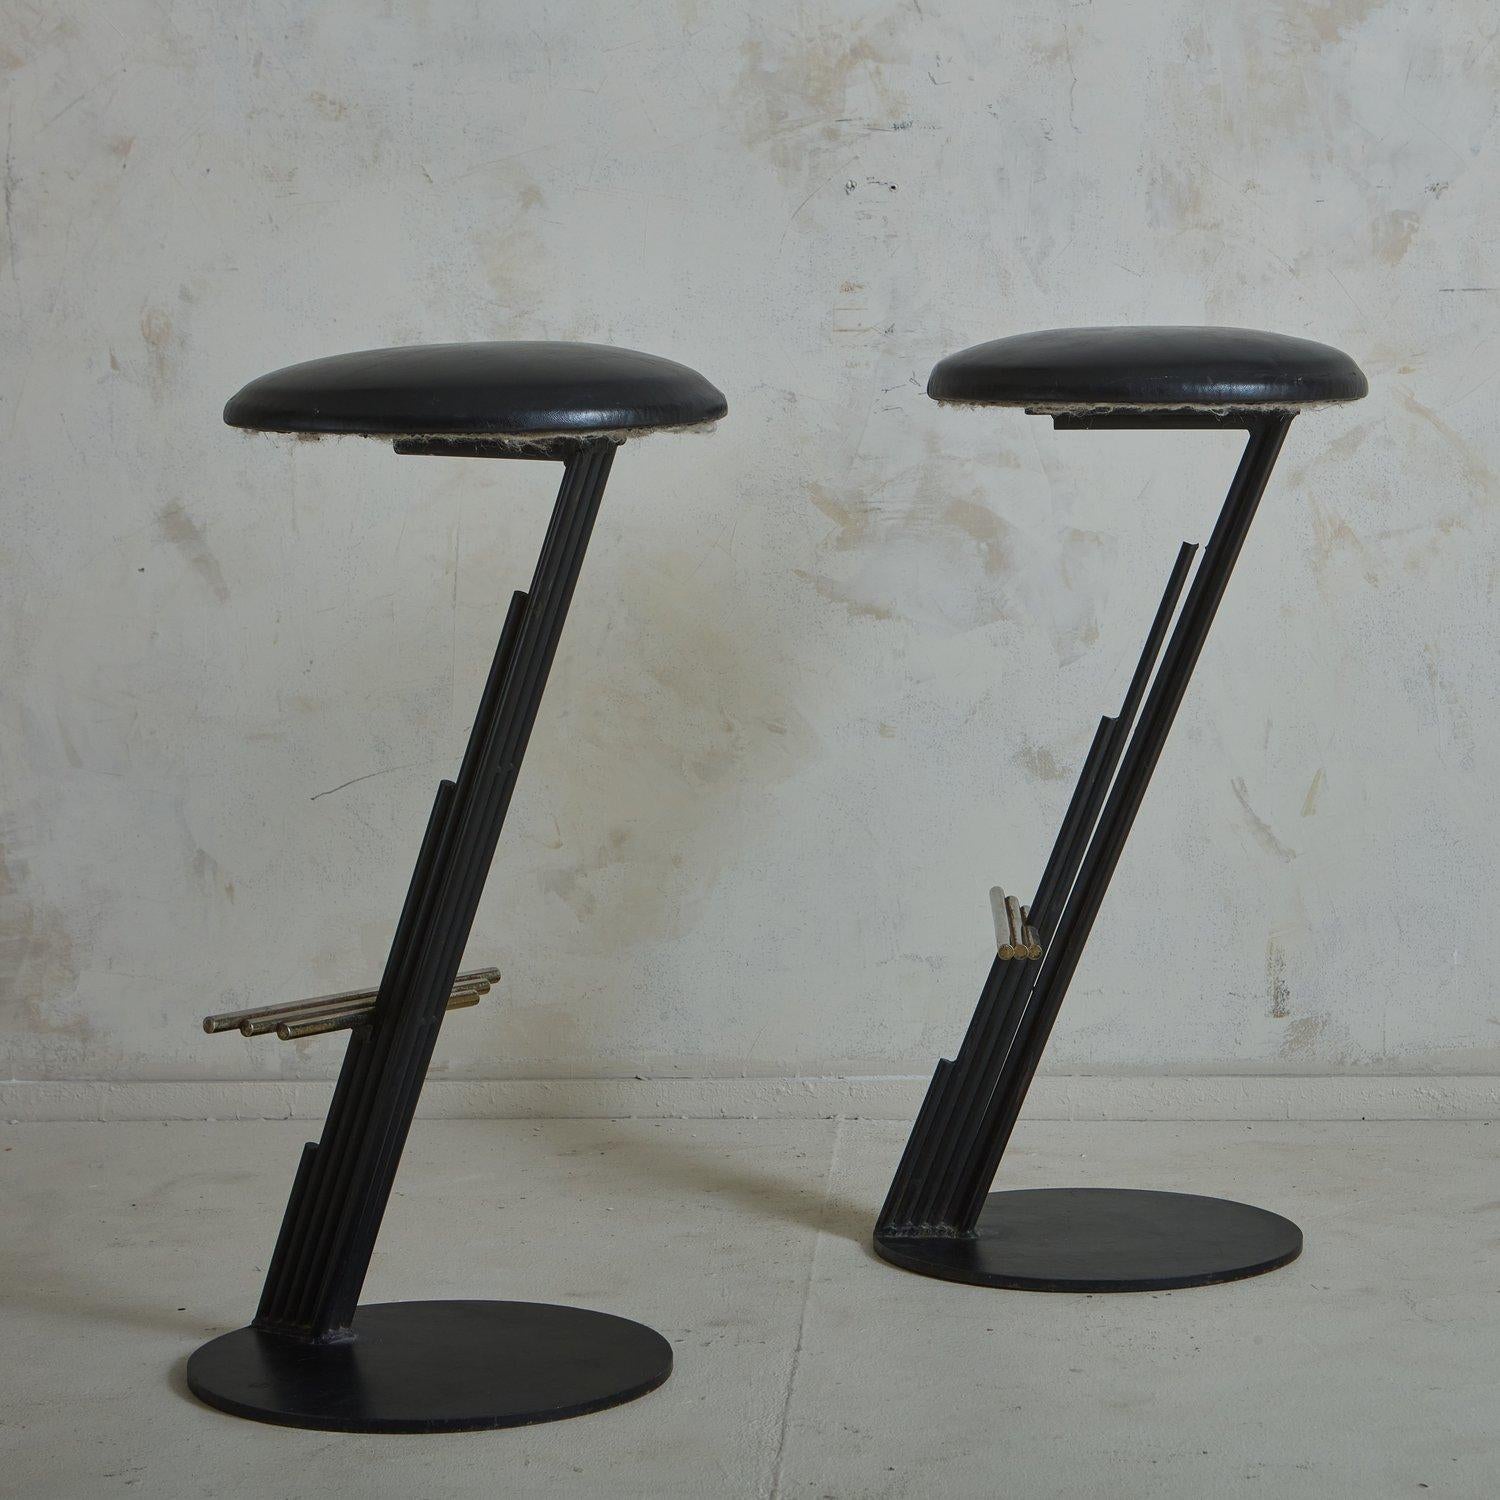 A pair of sculptural 1980s Brutalist stools by Curtis Jere (1910-2008) featuring a cantilever black enameled metal Z frame with layered rod details. These stools have circular metal bases and upholstered seats in original black leather. They have